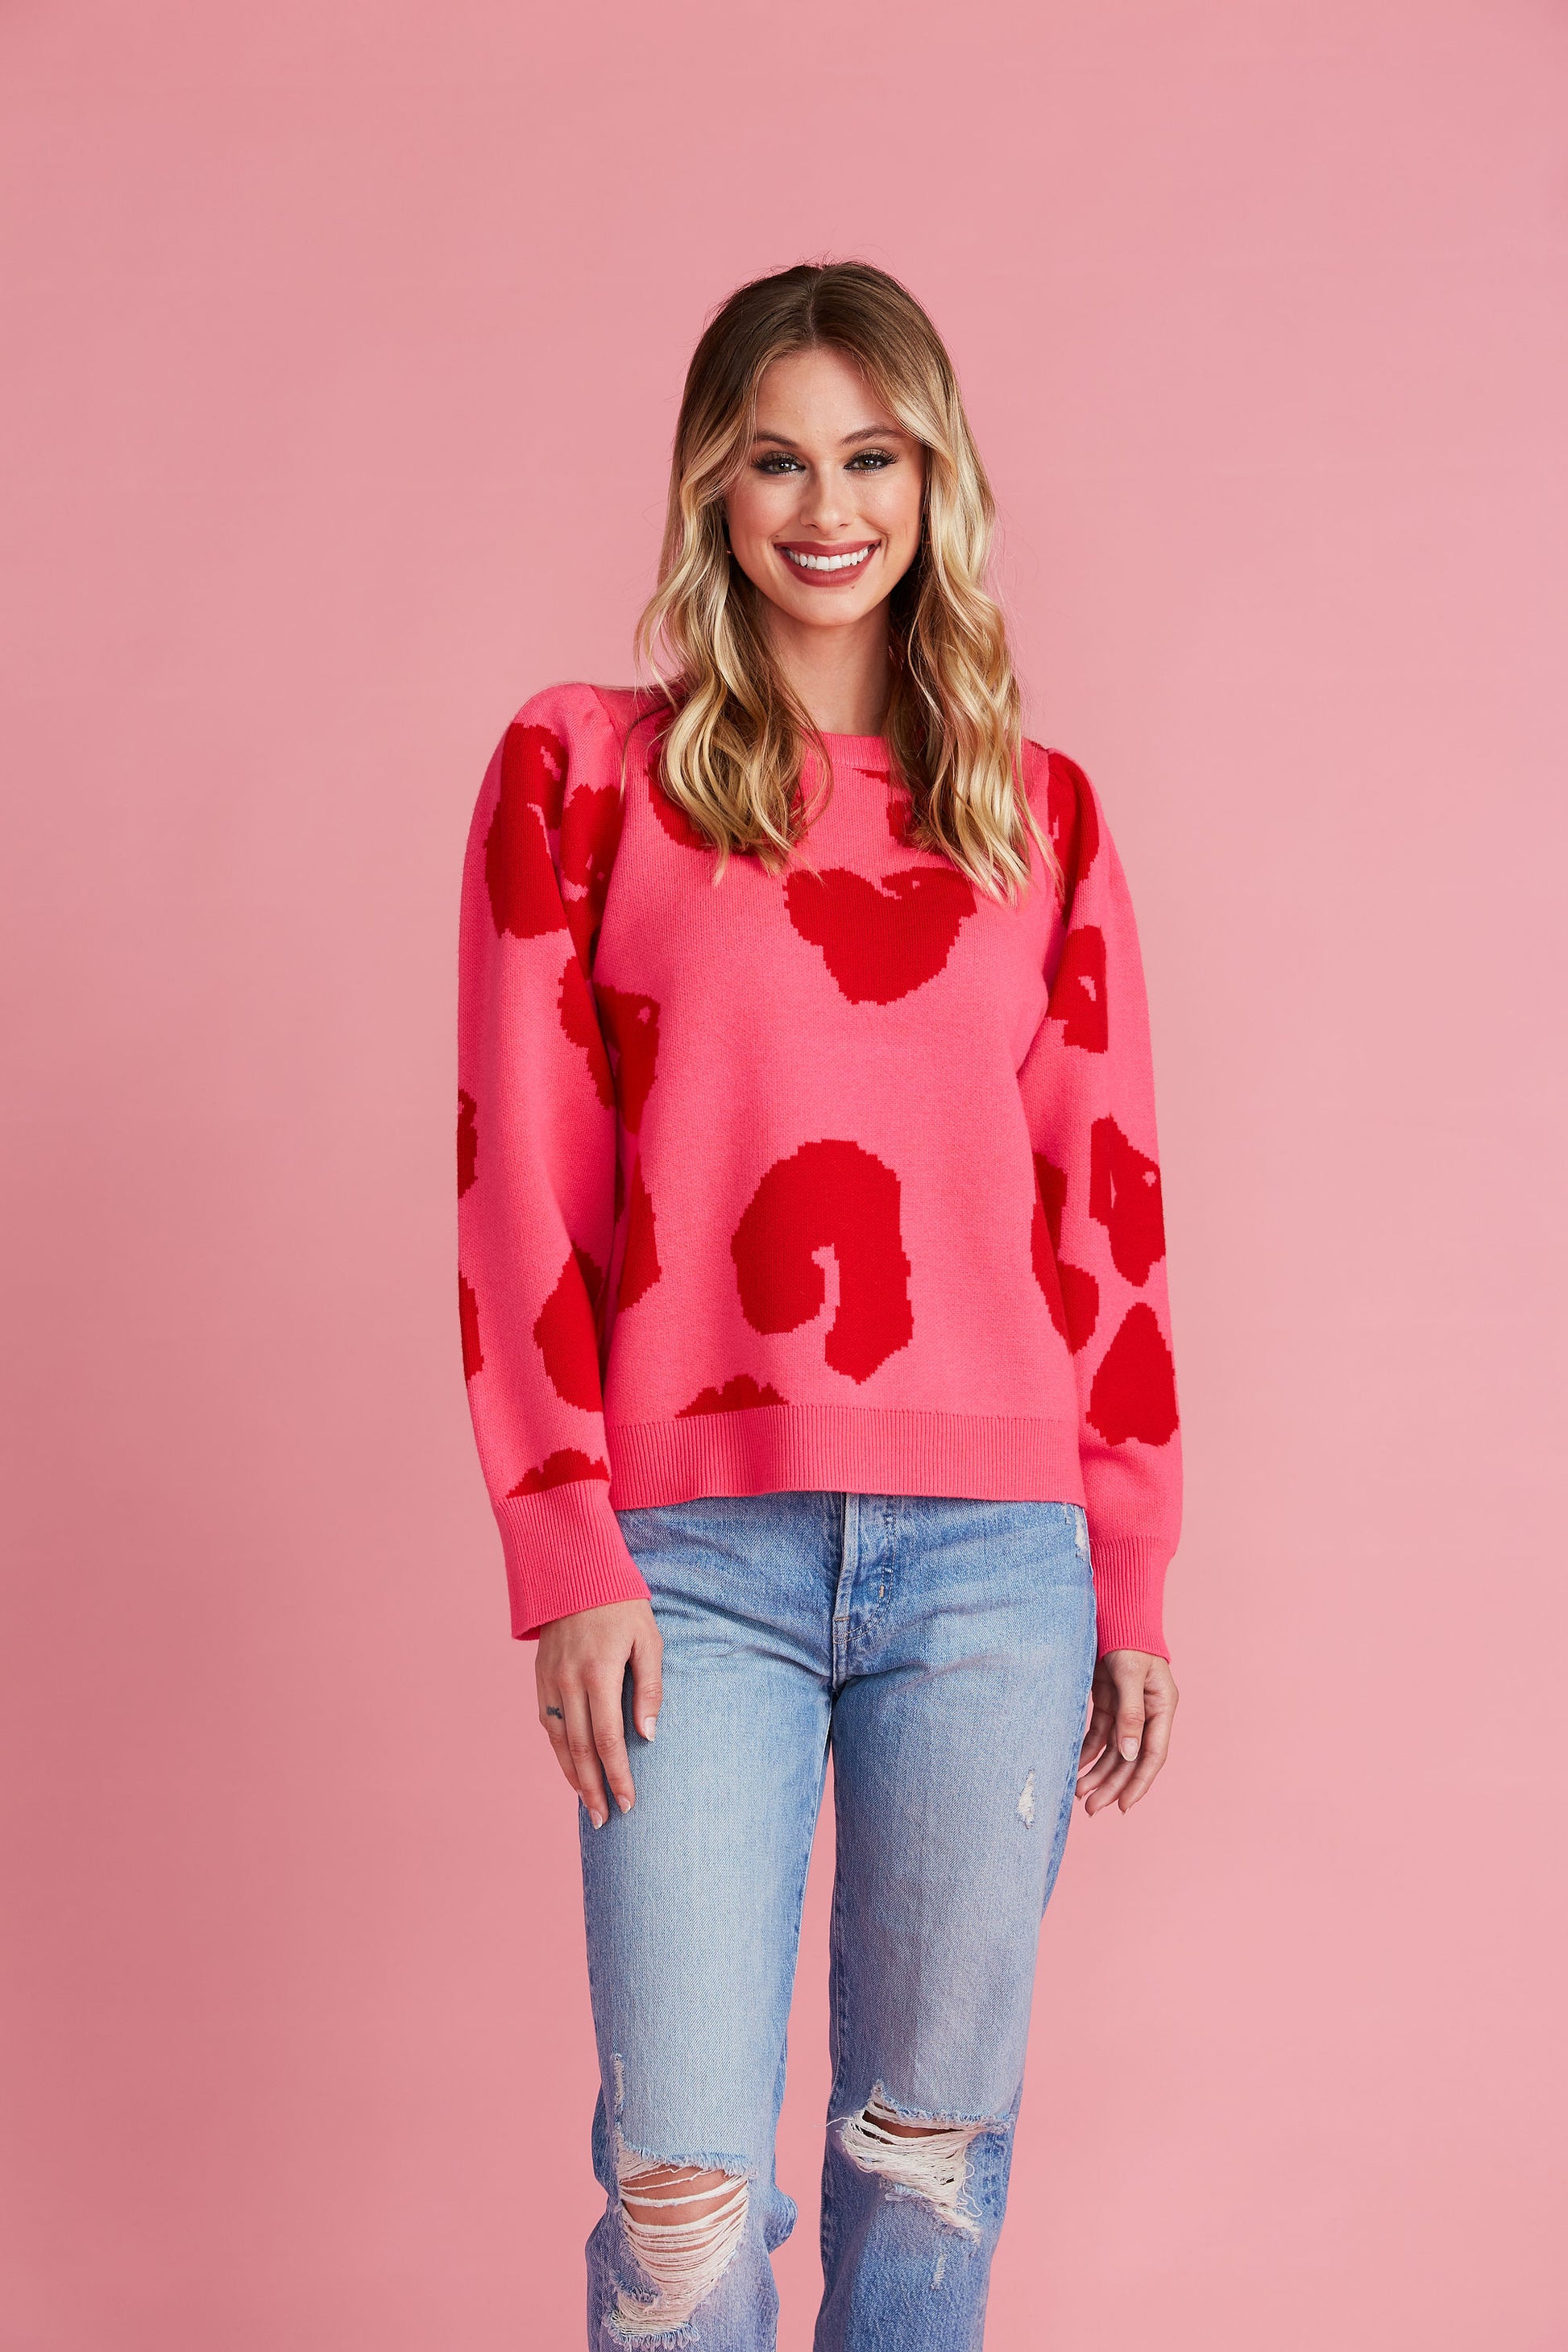 Woman in pink sweater with red leopard spots